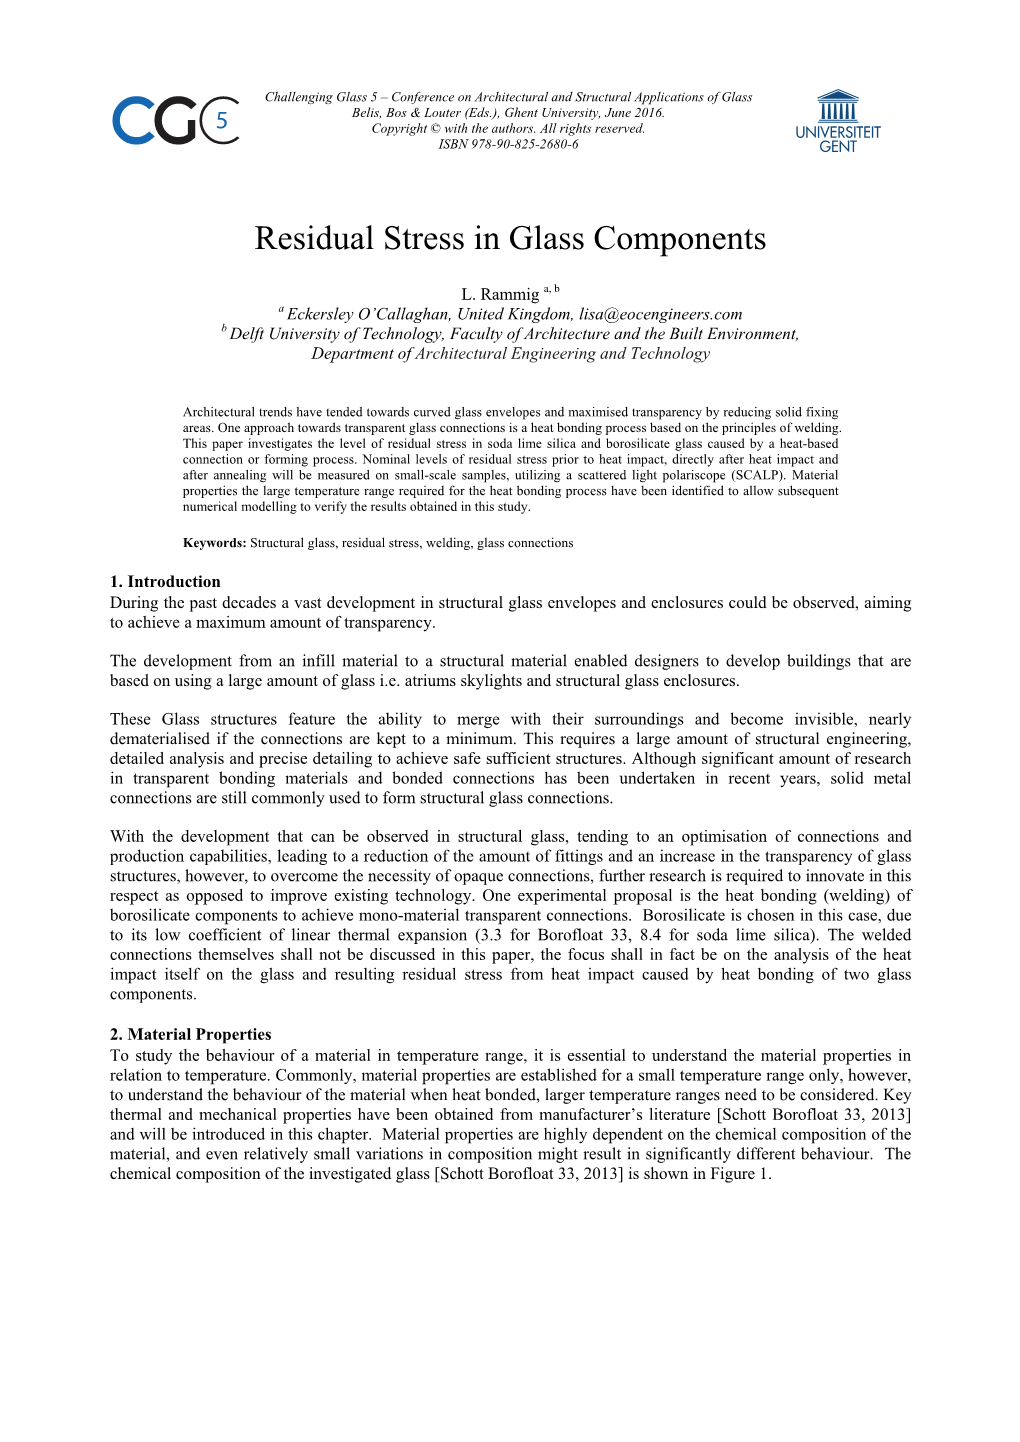 Residual Stress in Glass Components